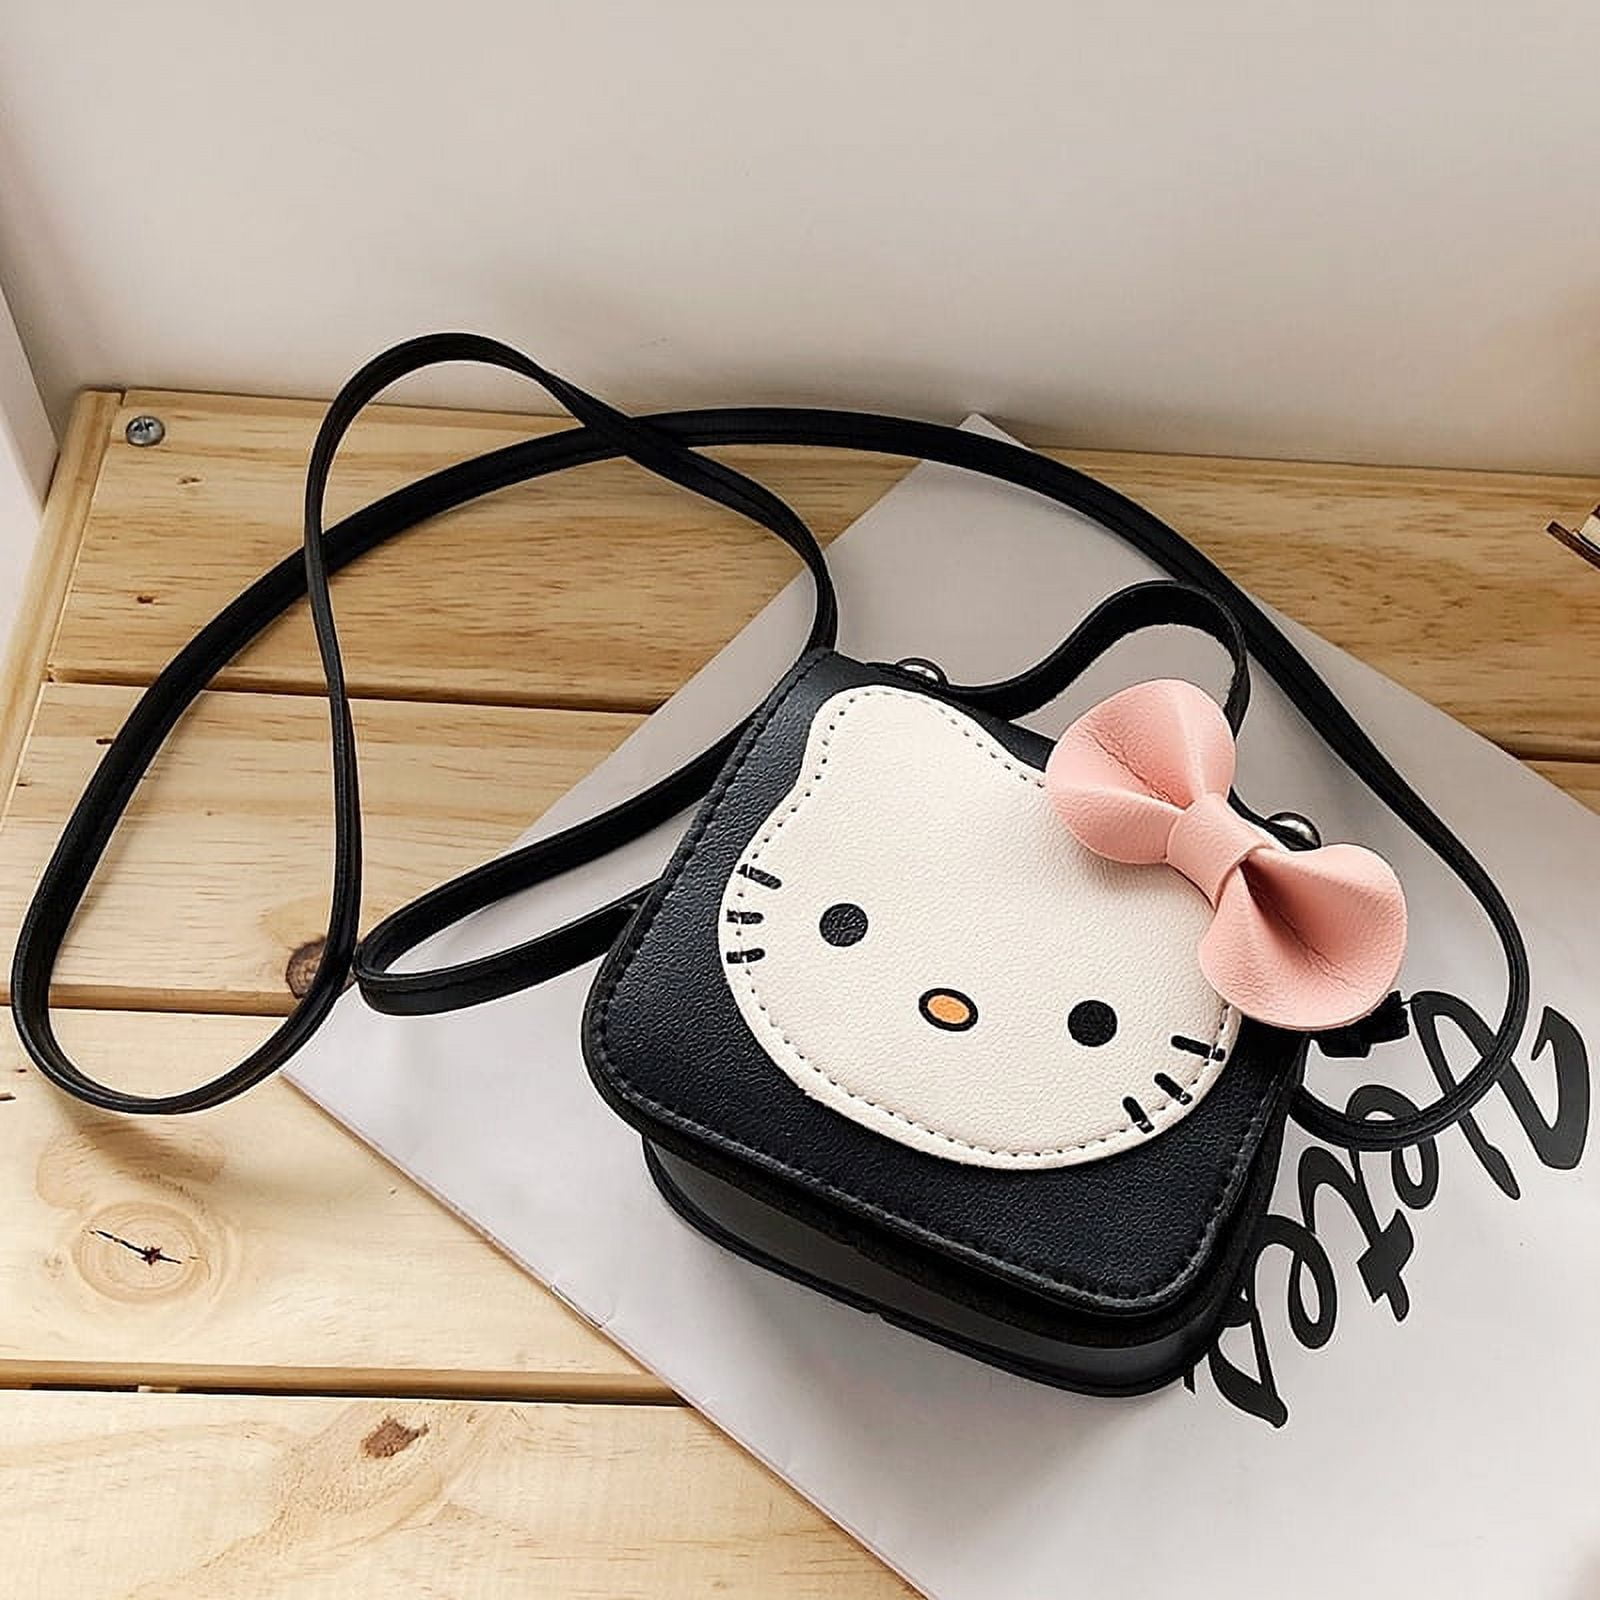 New Leather Bag Store House of Little Bunny Full Details